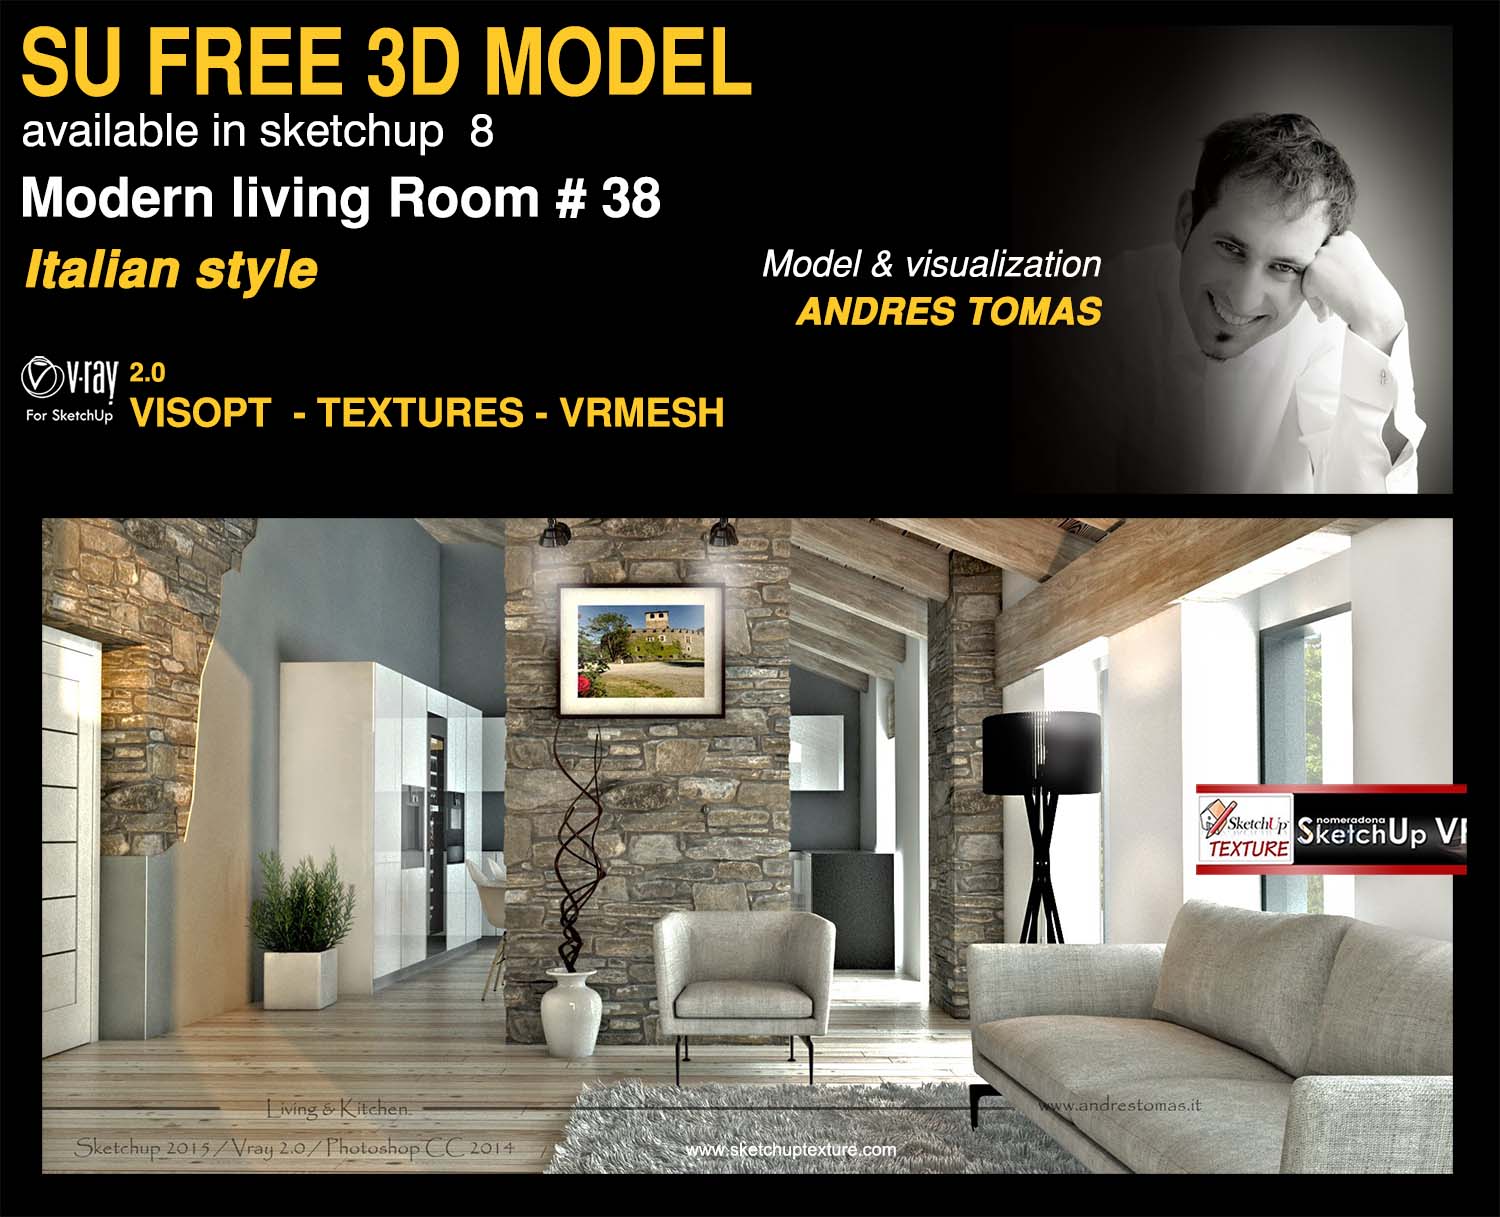 vray 5 for sketchup download